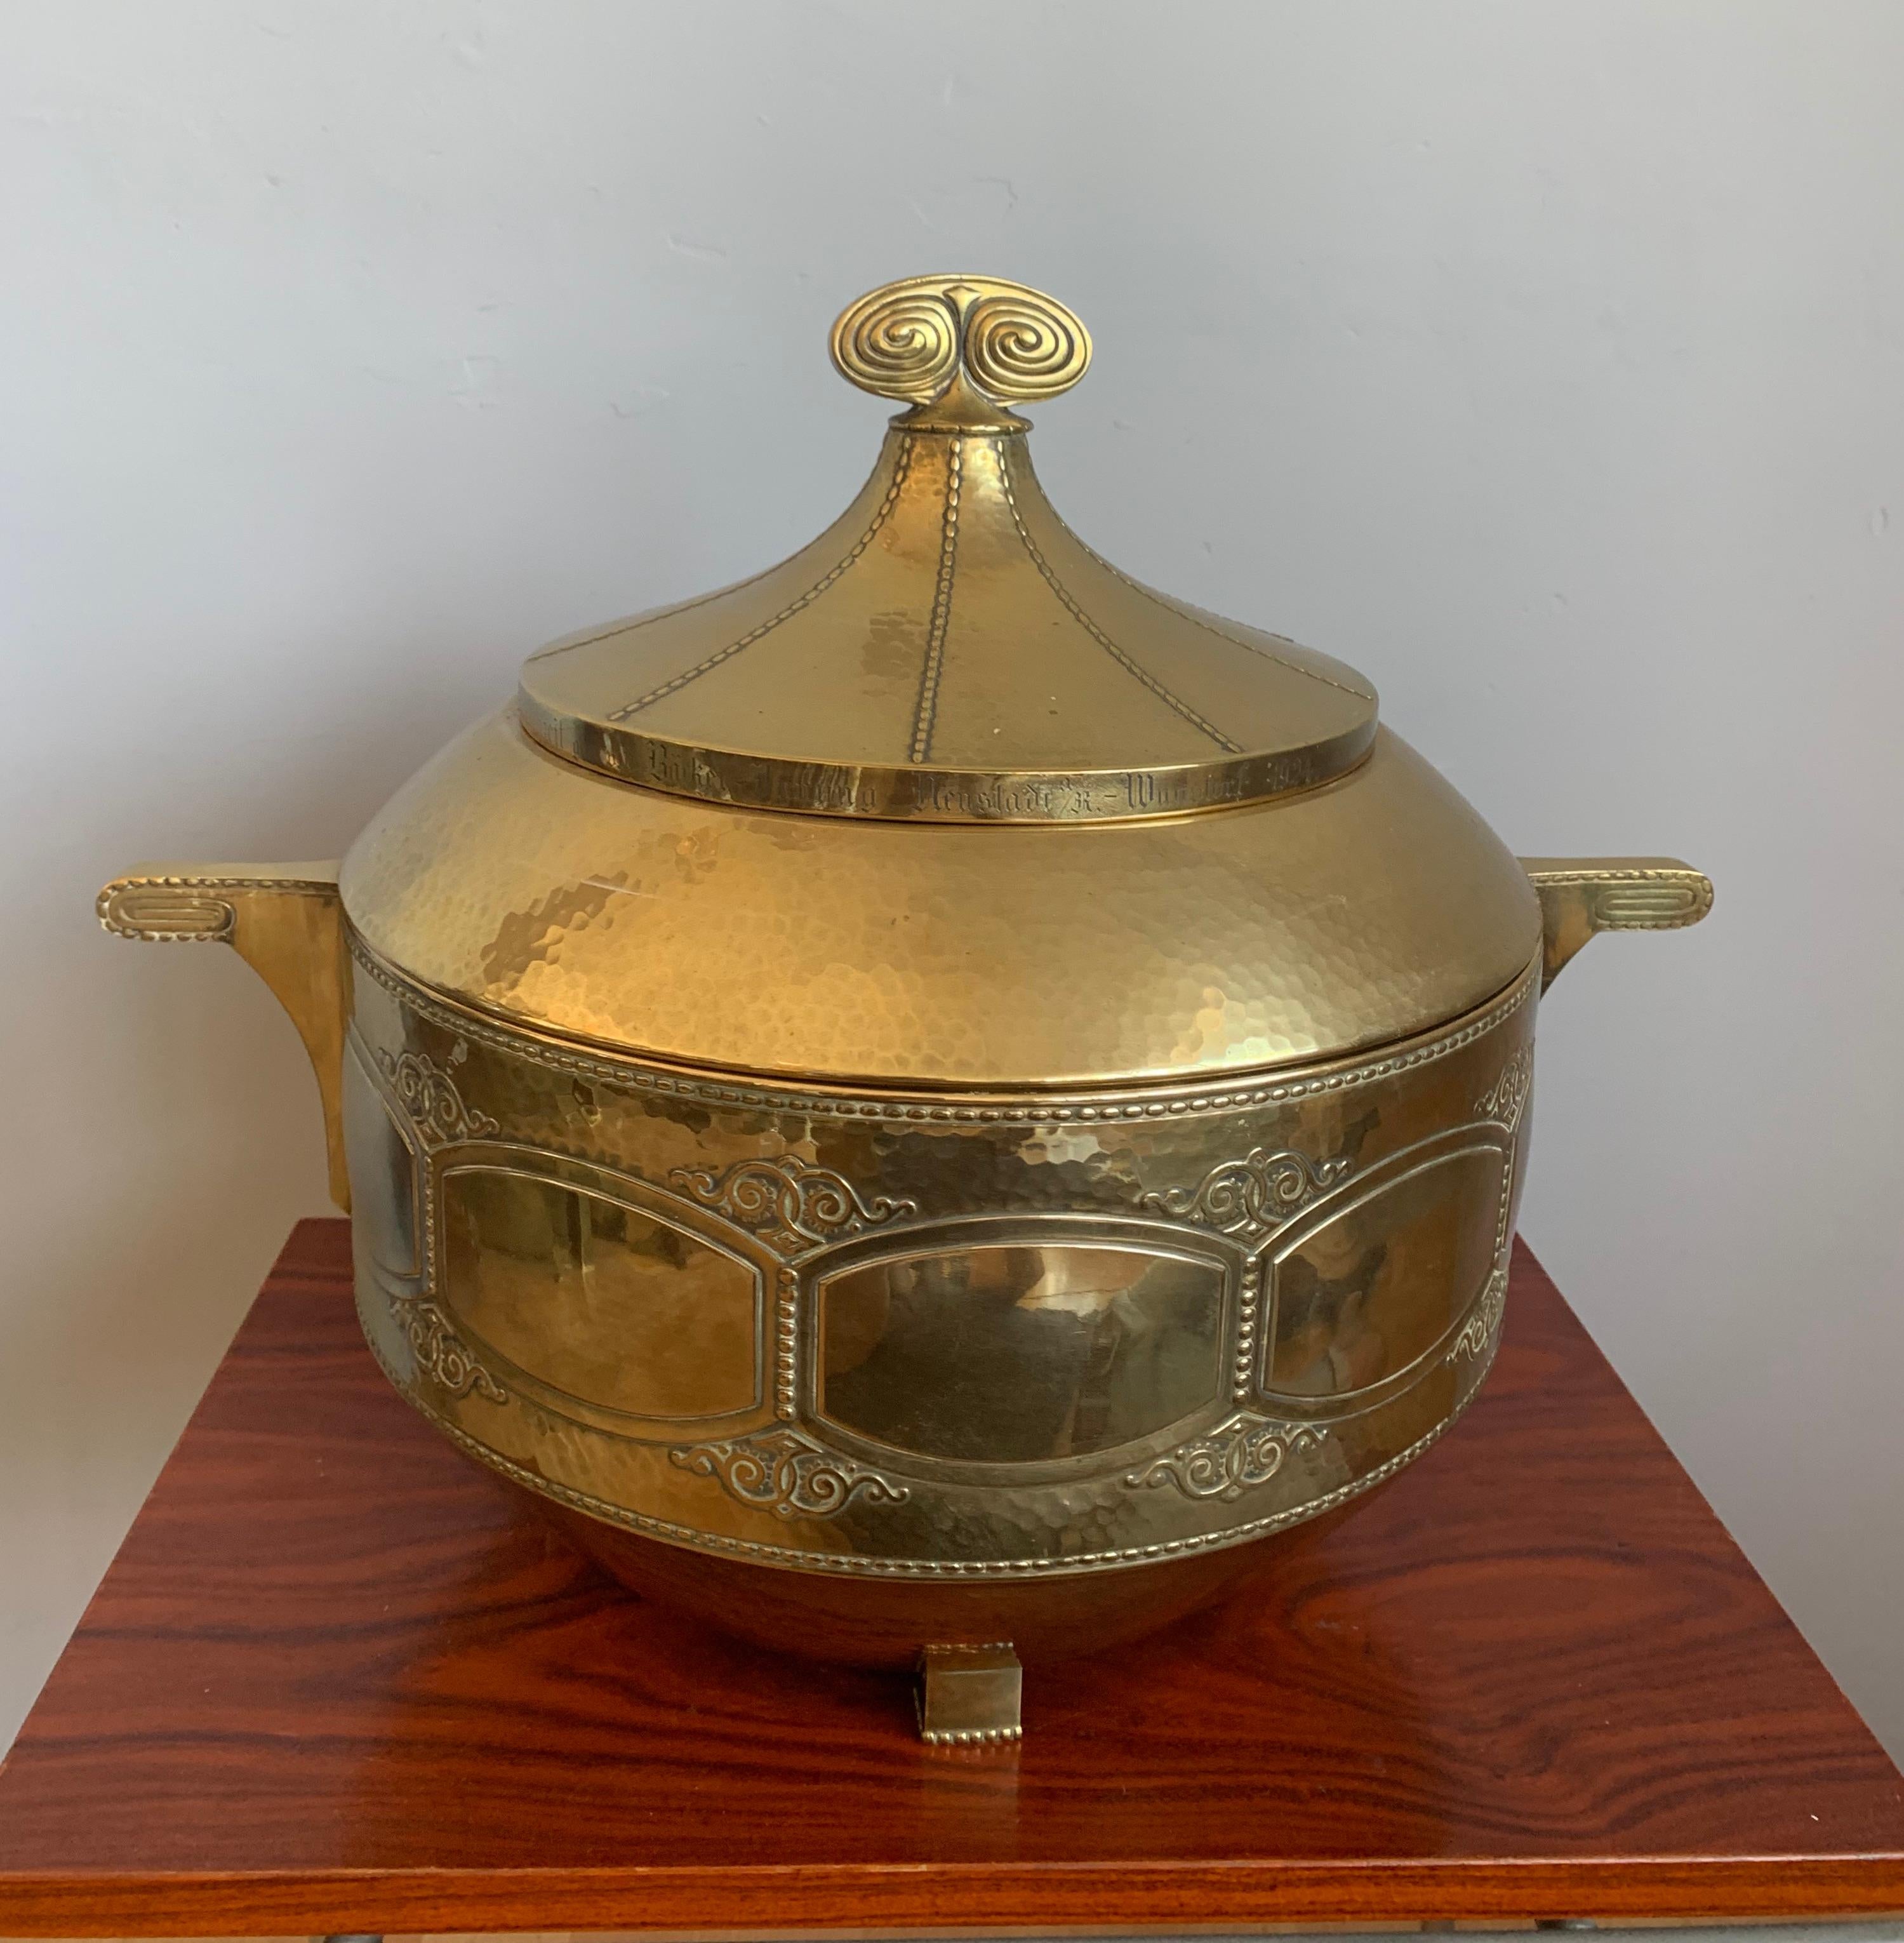 Large modernist design brass bowl with glass vessel and lid.

This unique and all handcrafted punchbowl from the Arts & Crafts era is another one of our recent great finds. Pieces from this era of top quality workmanship never seize to amaze us and